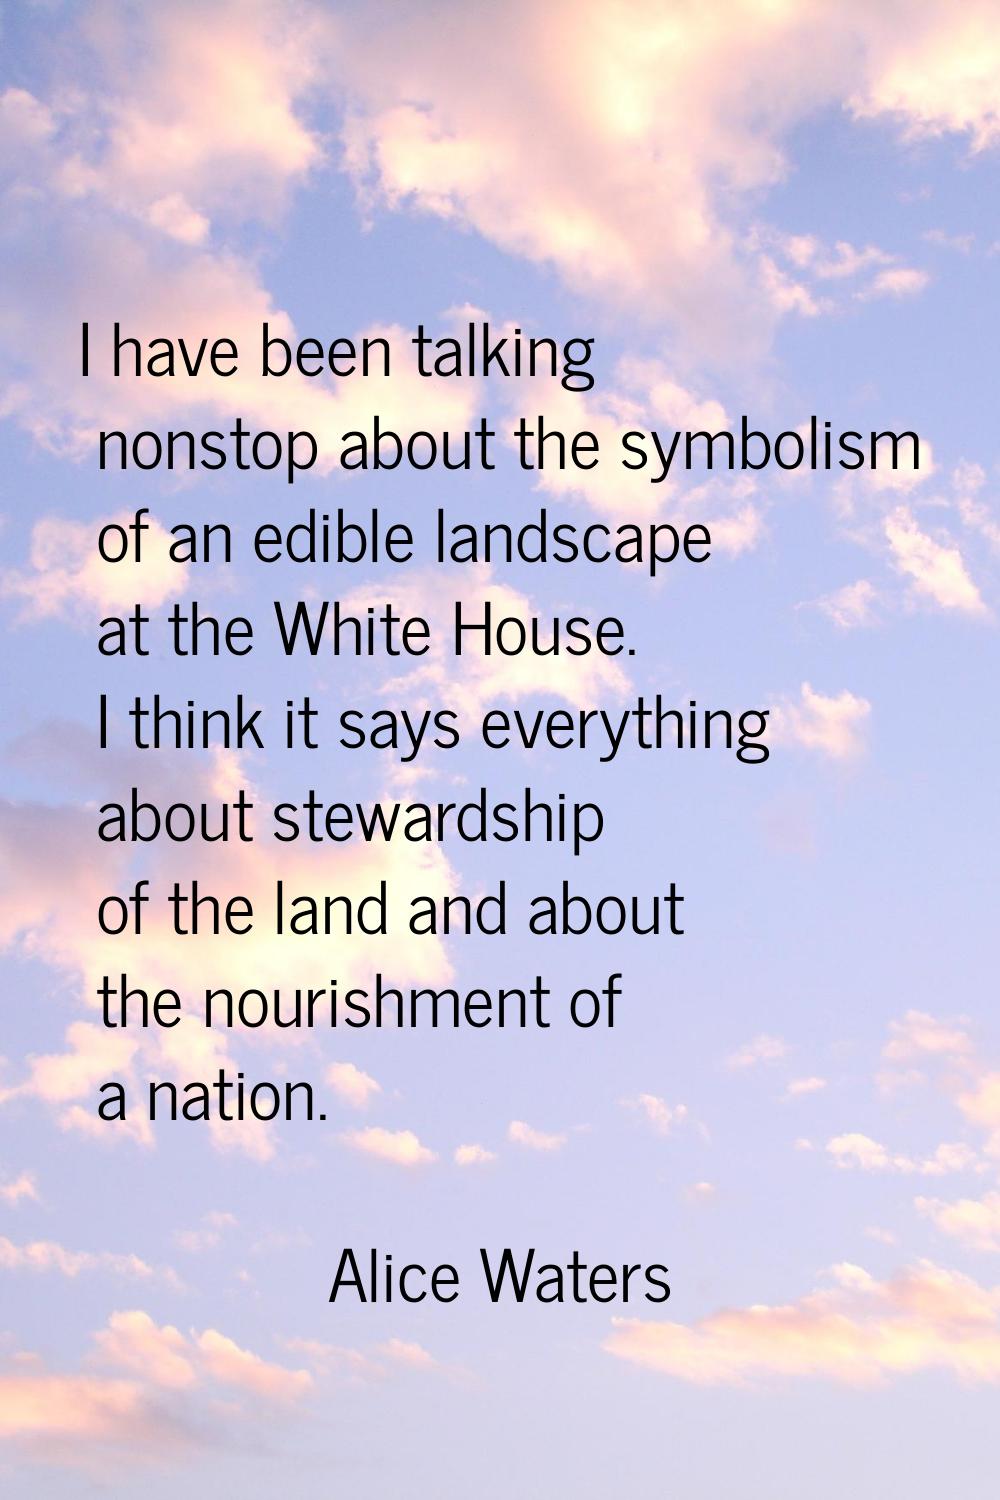 I have been talking nonstop about the symbolism of an edible landscape at the White House. I think 